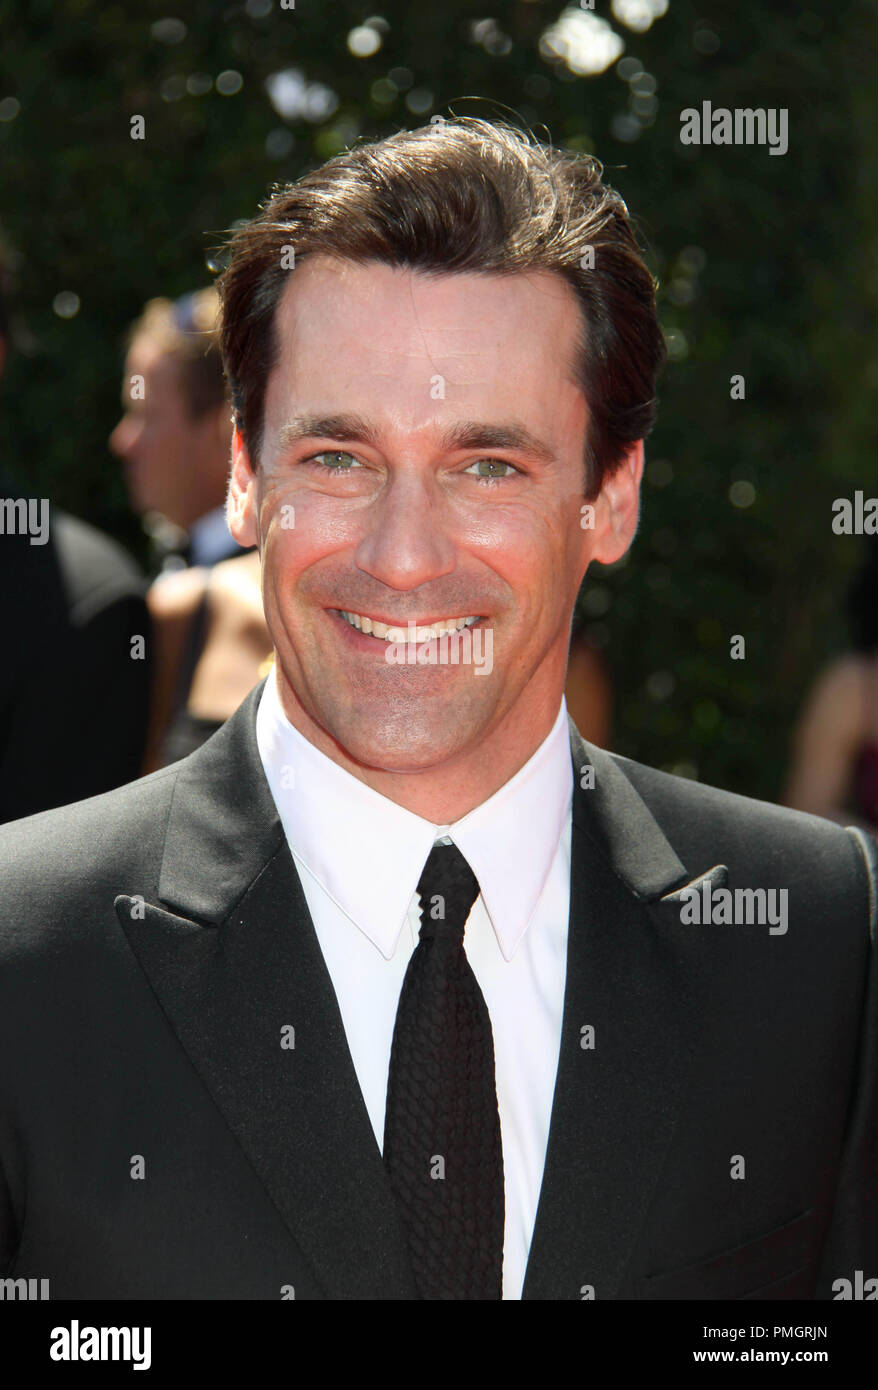 Jon Hamm 08/21/10 '2010 Emmy Creative Arts Awards Arrival' @Nokia Theatre, Downtown LA Photo by Ima Kuroda/HNW / PictureLux   File Reference # 30436 008PLX   For Editorial Use Only -  All Rights Reserved Stock Photo